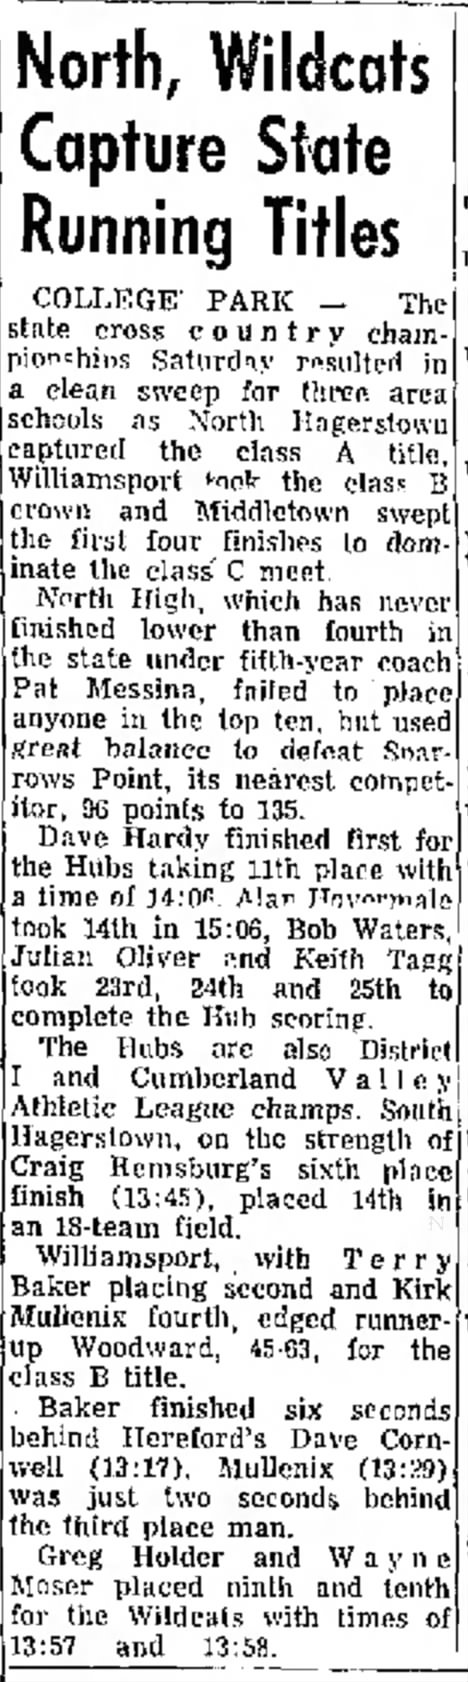 1972 State Title - 
Daily Mail Nov 13, 1972